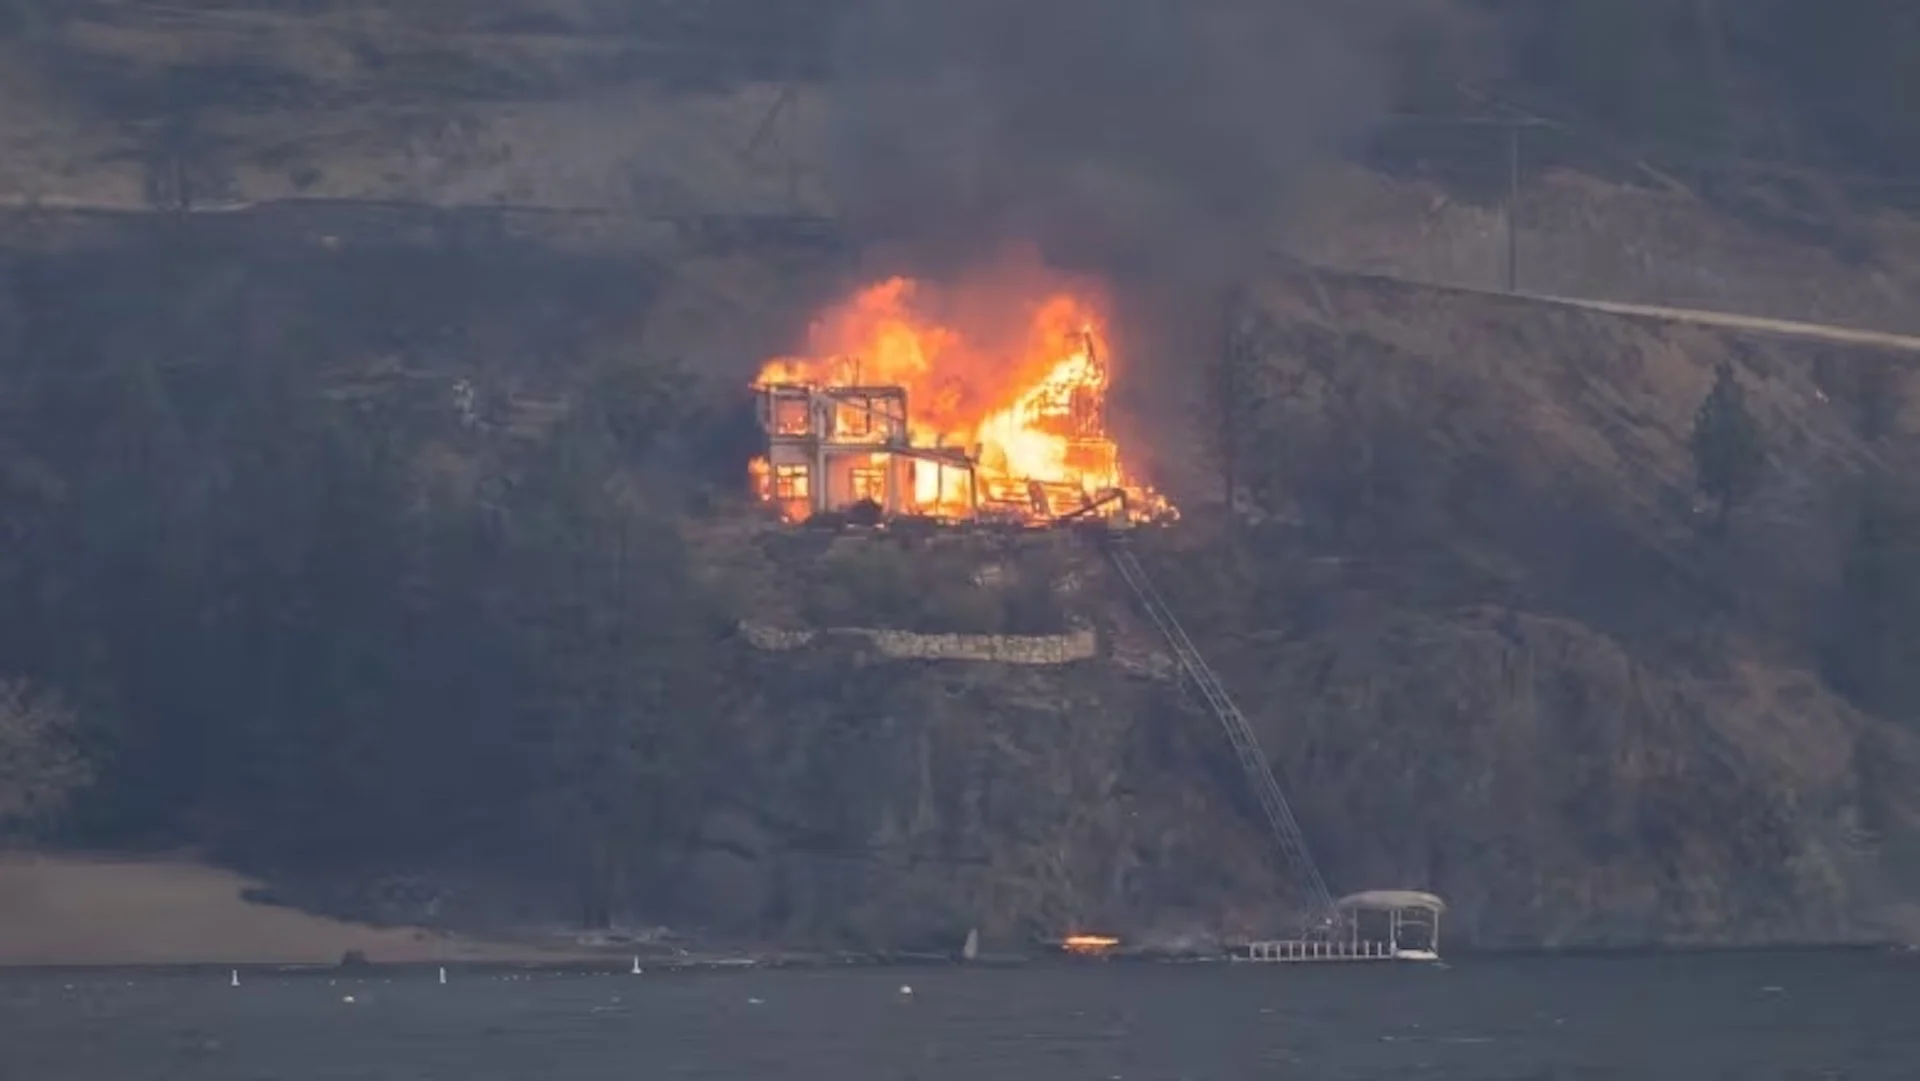 Up to 200 buildings estimated destroyed by Okanagan wildfires, fire chiefs say